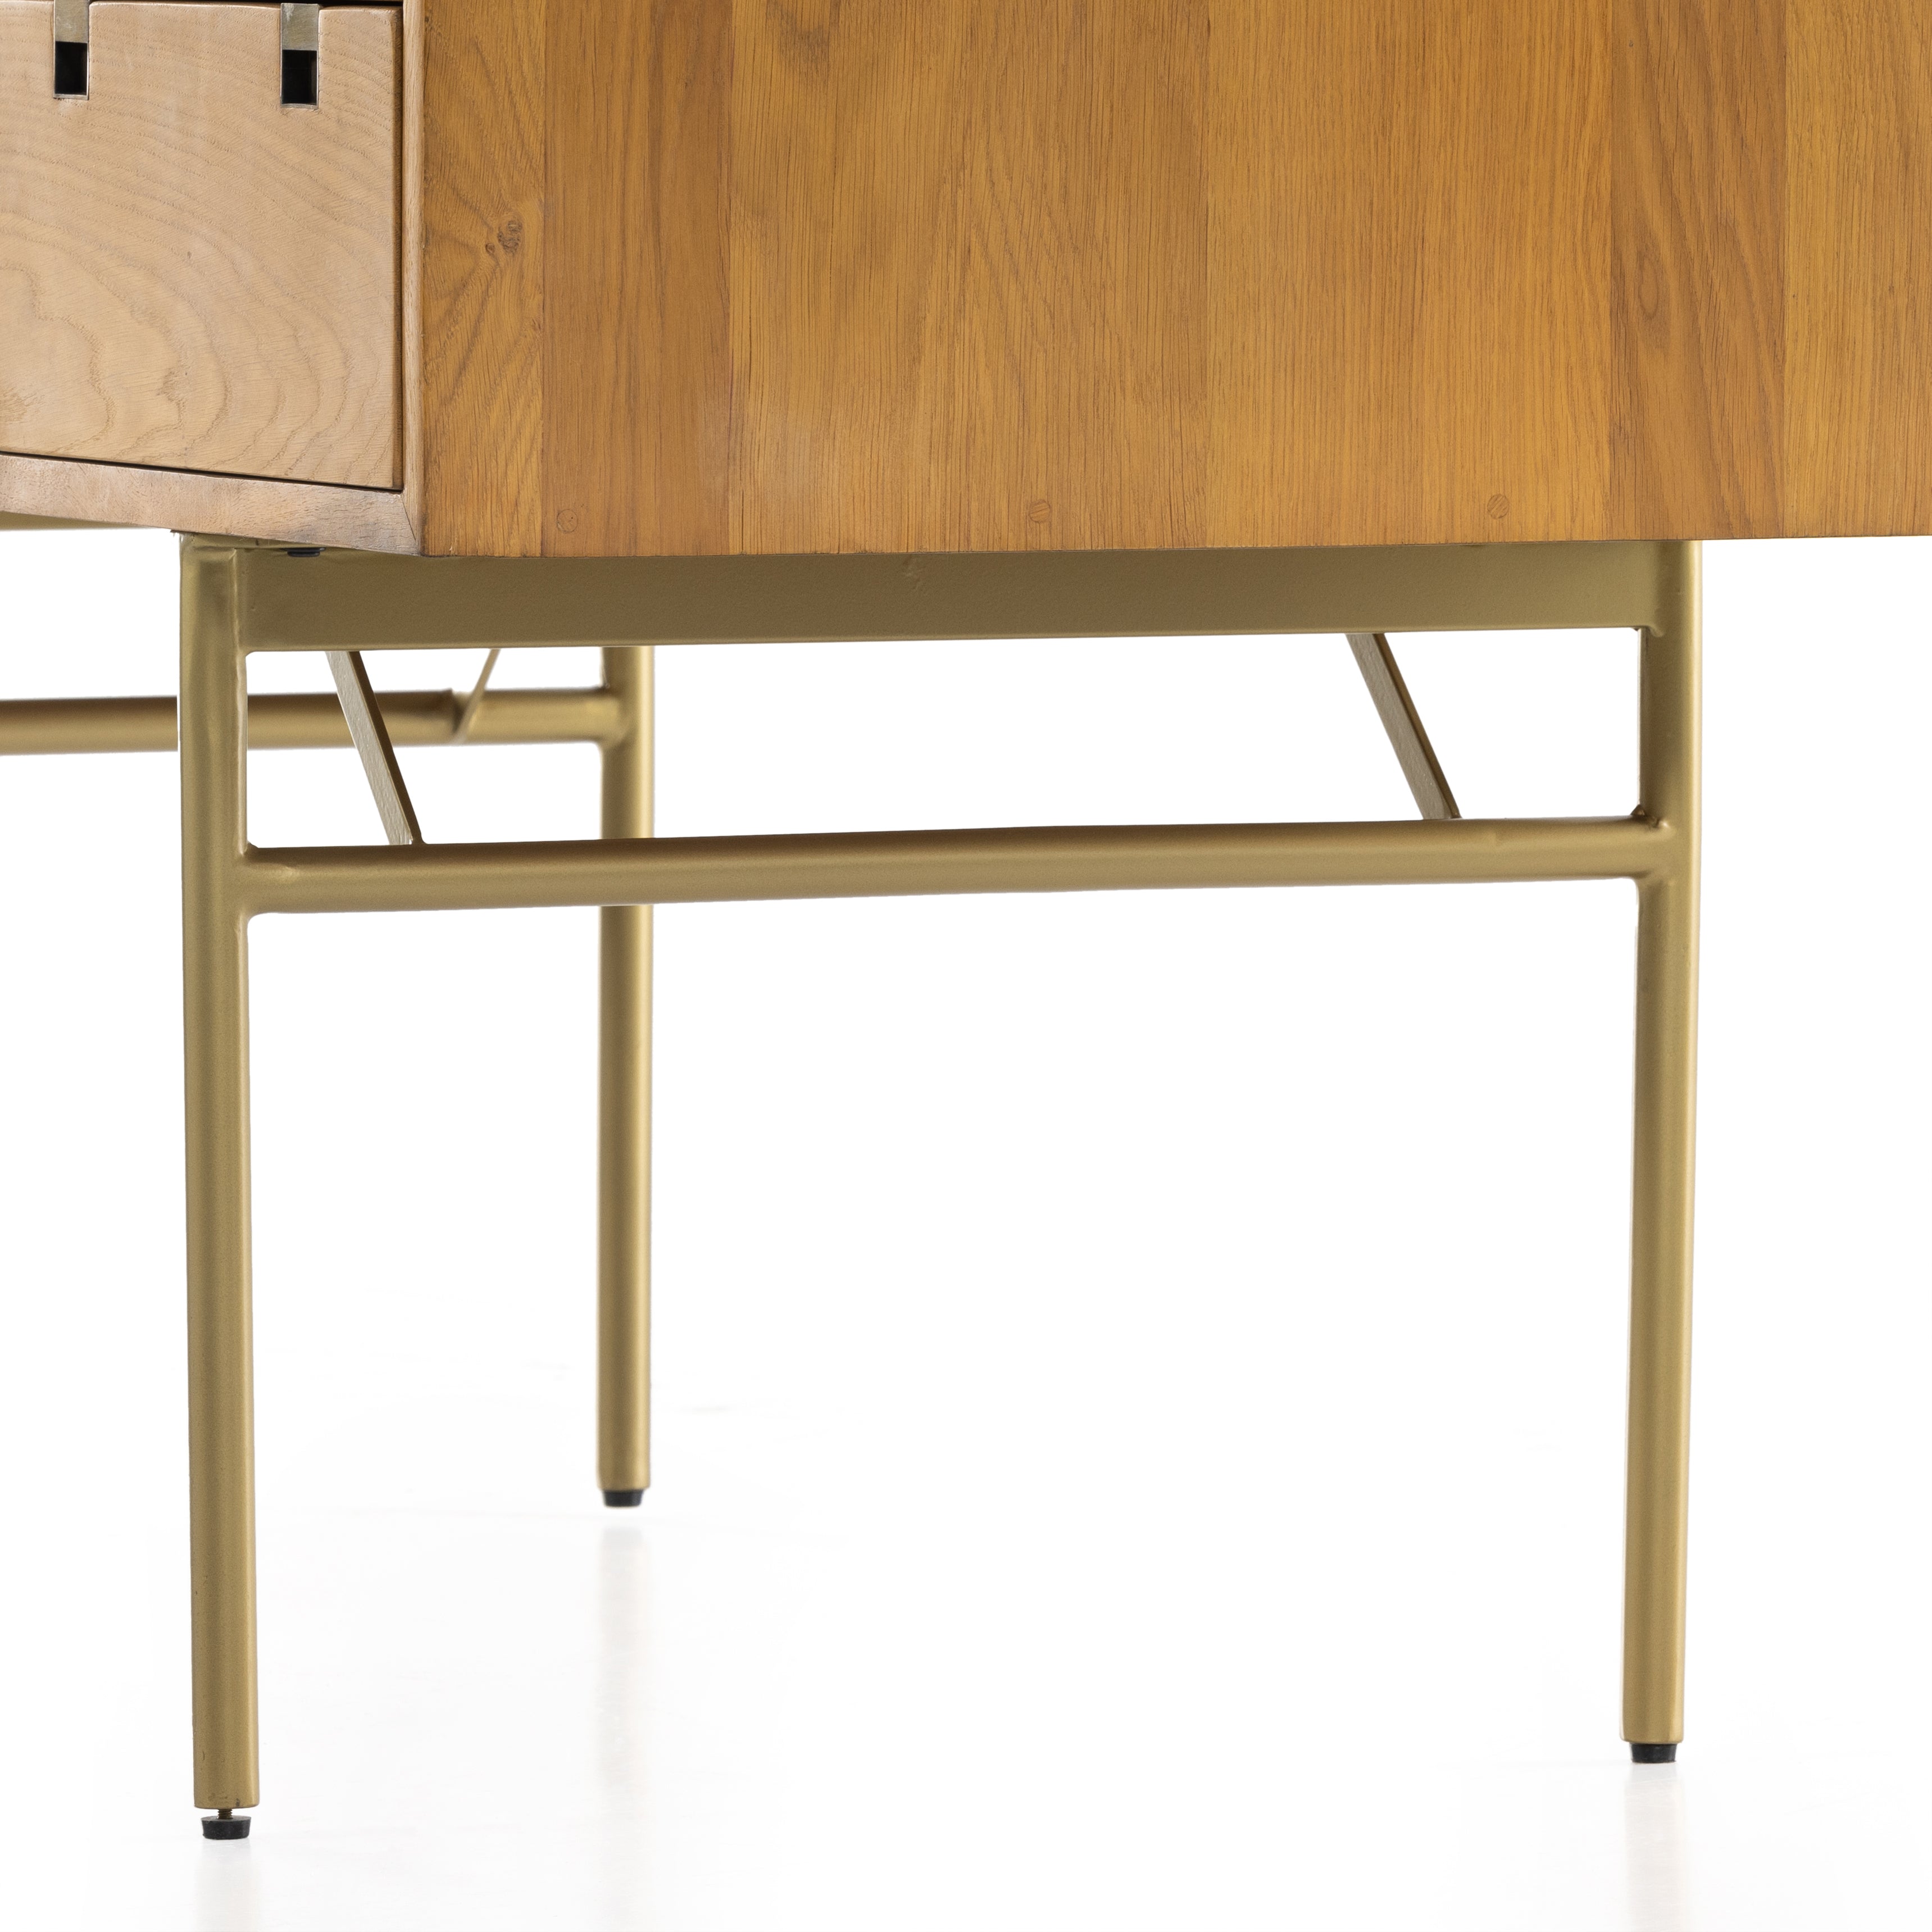 Style meets simplicity in this Danish-inspired design. A slim, streamlined desk of solid natural oak features squared hardware and airy legs finished in a satin brass. Five drawers offer ample storage space for frequently used office supplies. Amethyst Home provides interior design, new construction, custom furniture, and area rugs in the Charlotte metro area.